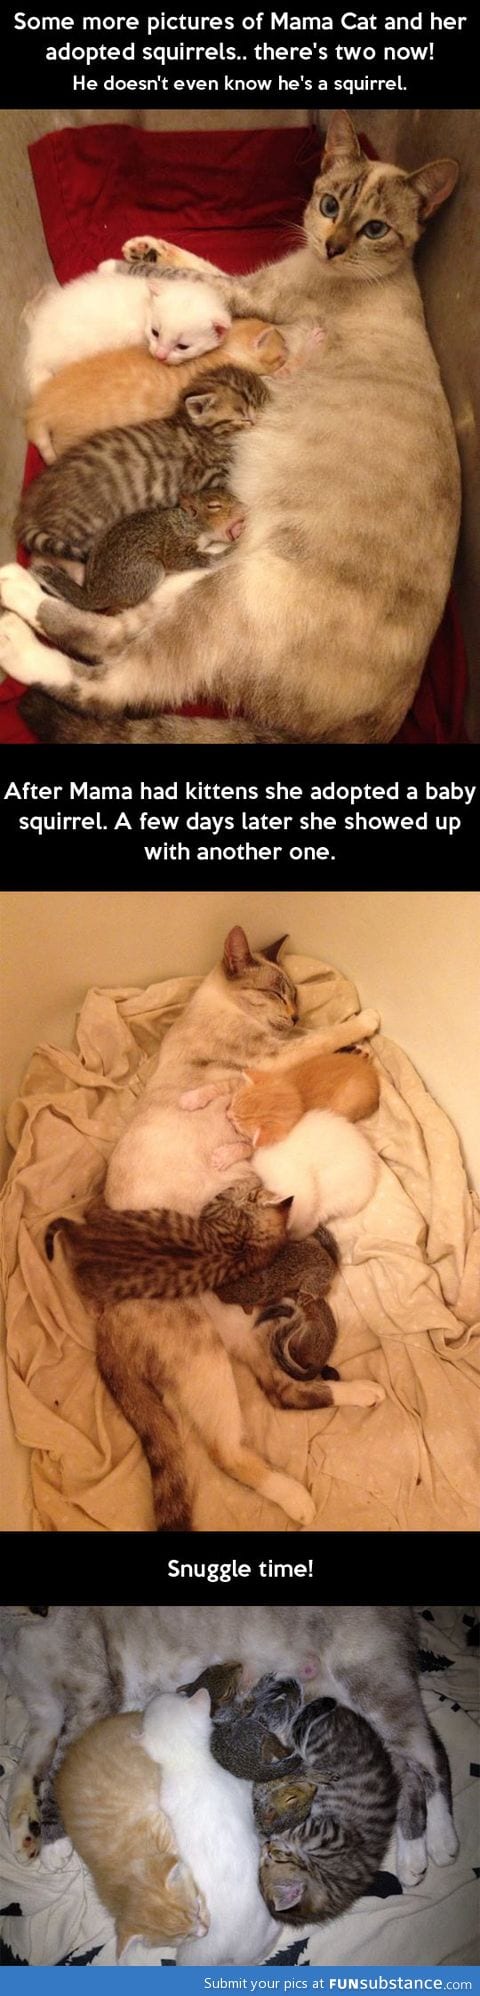 Mama cat and her adopted squirrels